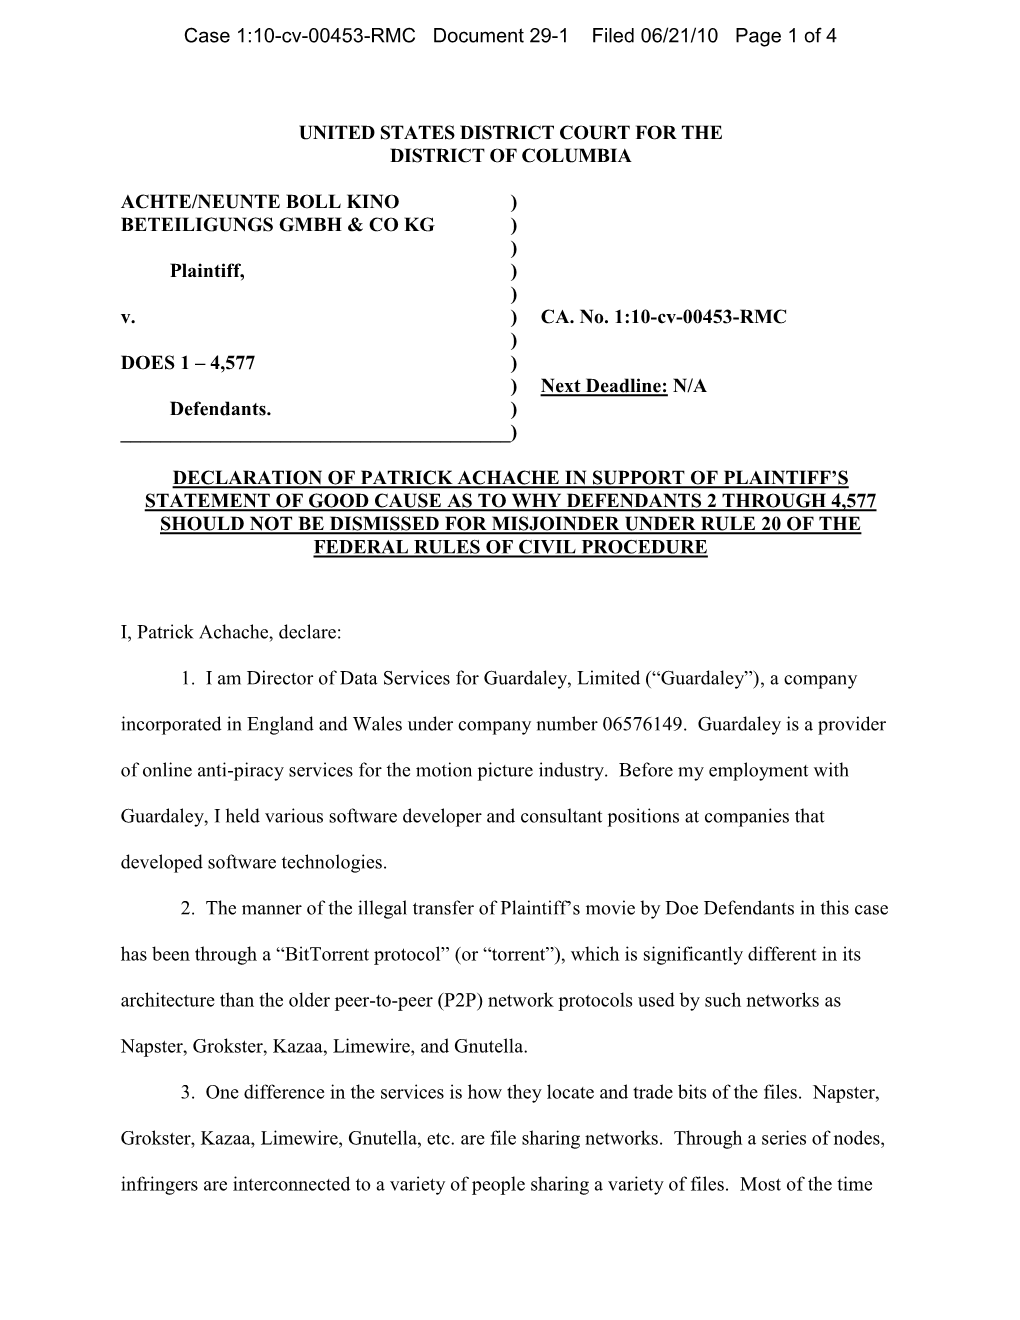 Case 1:10-Cv-00453-RMC Document 29-1 Filed 06/21/10 Page 1 of 4